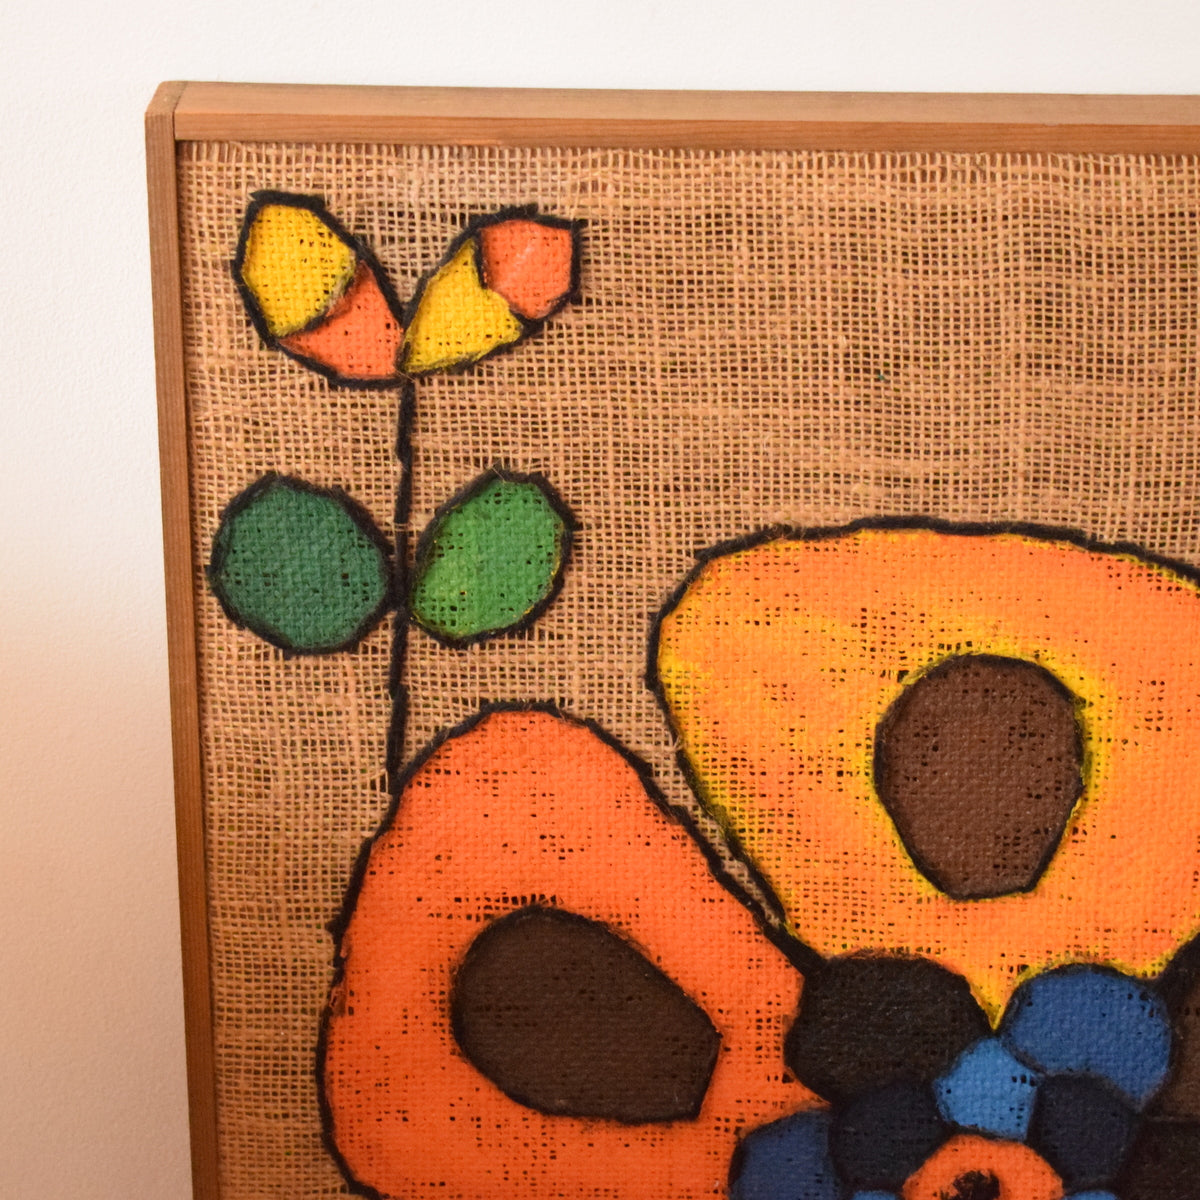 Vintage 1960s Large Swedish Hessian Collage Picture / Painting - Lennart Olsson - Flower Power